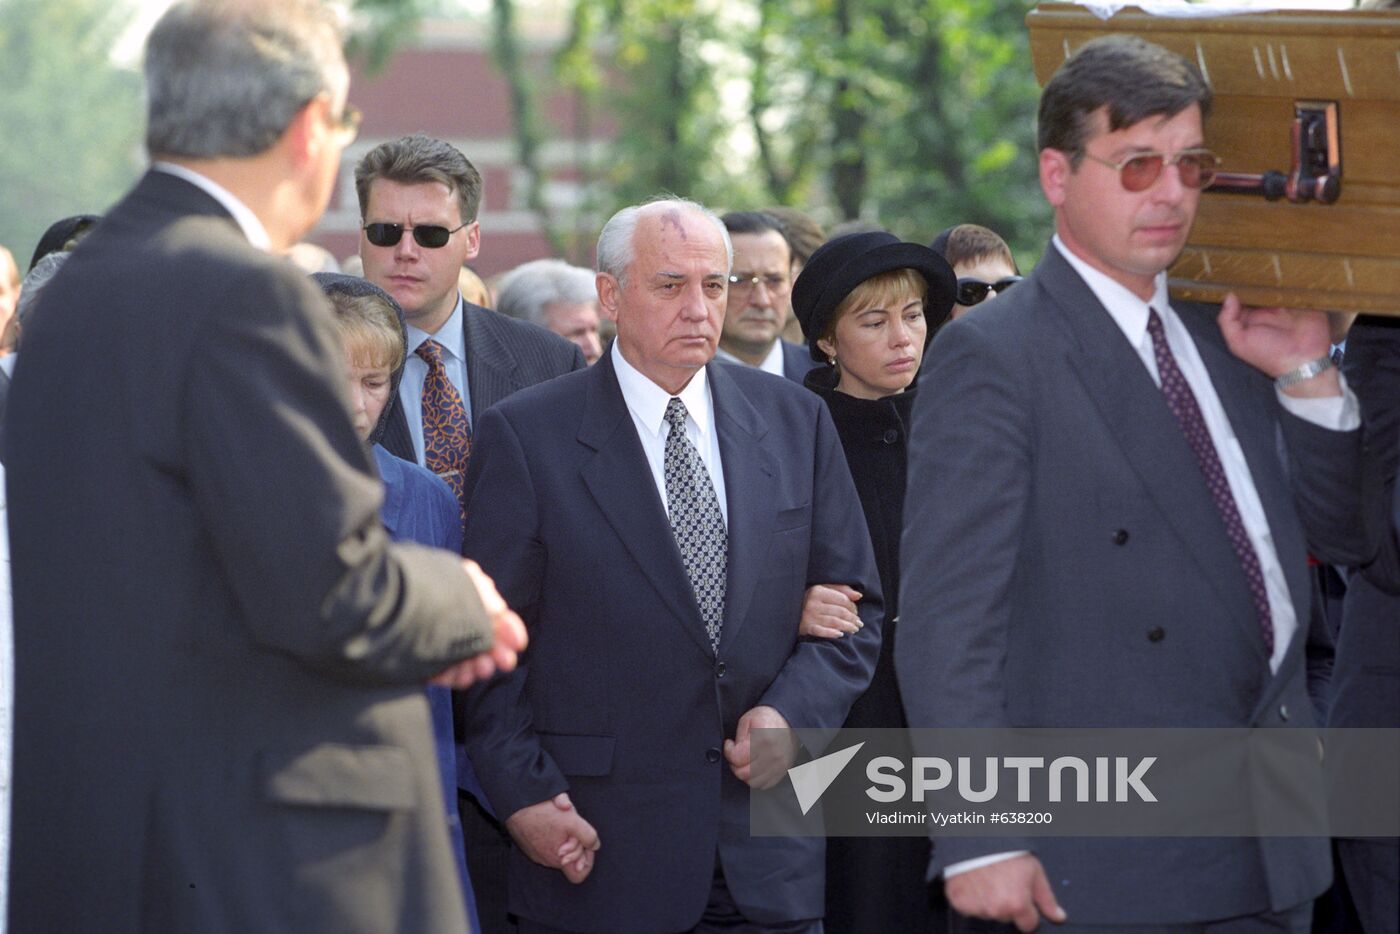 Mikhail Gorbachev with his daughter at the funeral of his spouse